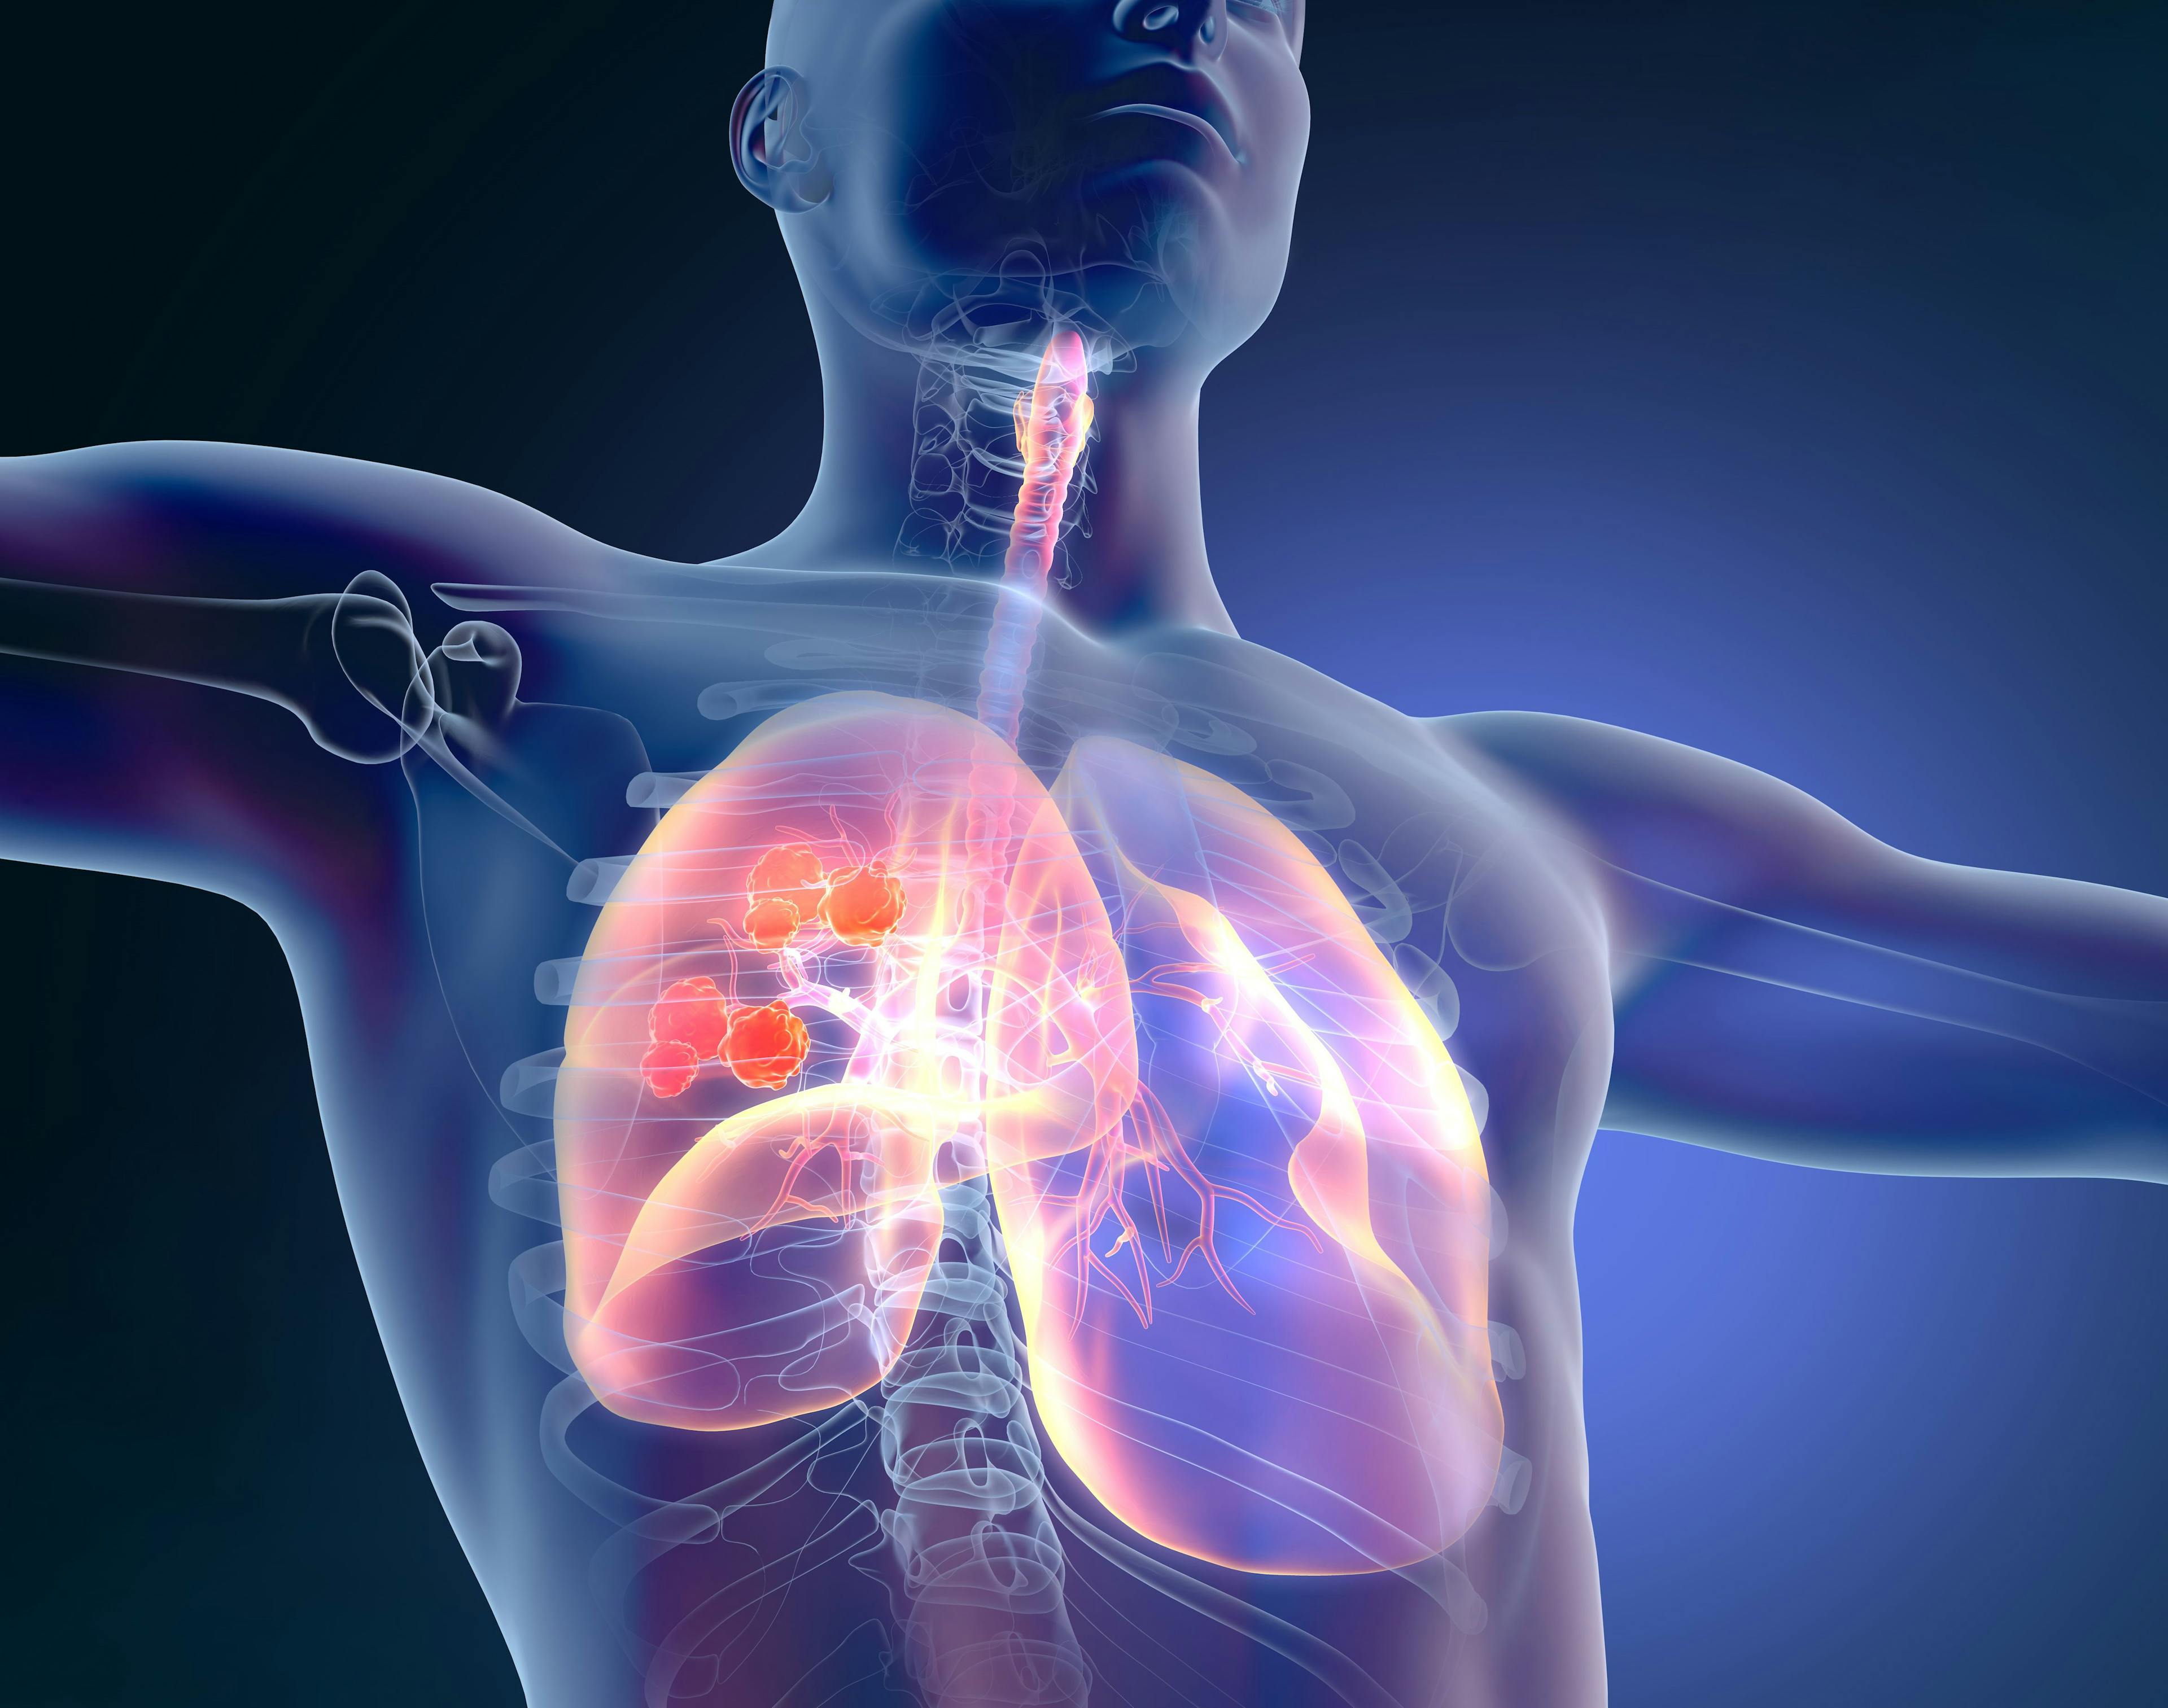 FDA Grants Atezolizumab Priority Review as Adjuvant Treatment for Certain Patients With NSCLC